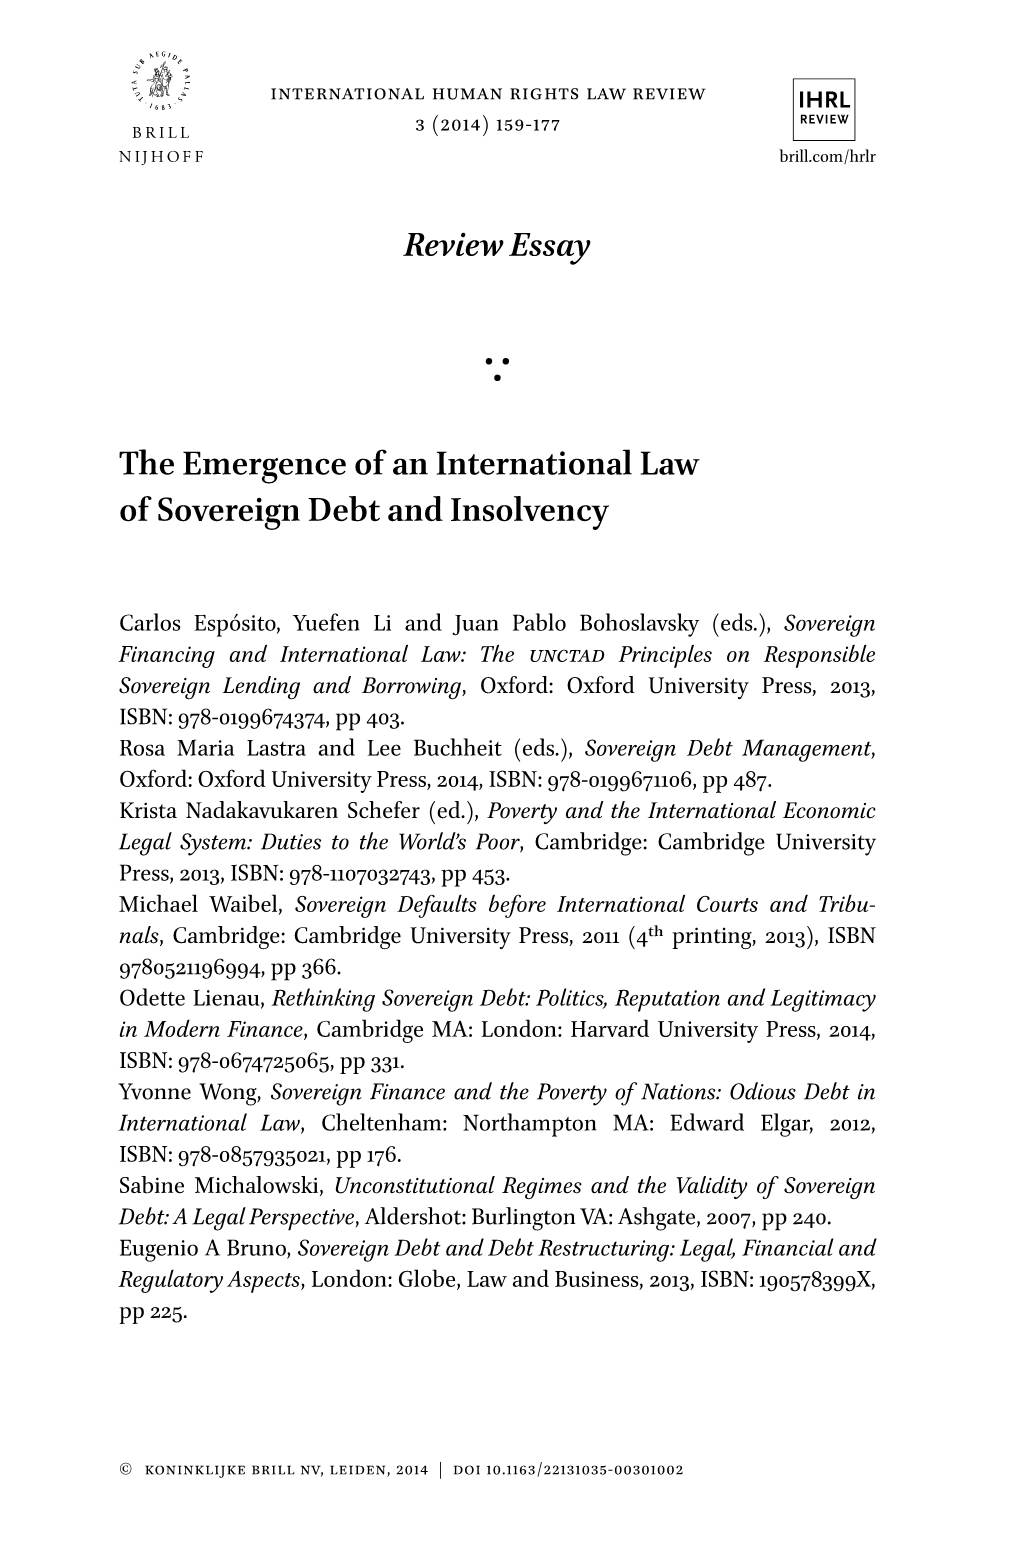 Review Essay the Emergence of an International Law of Sovereign Debt